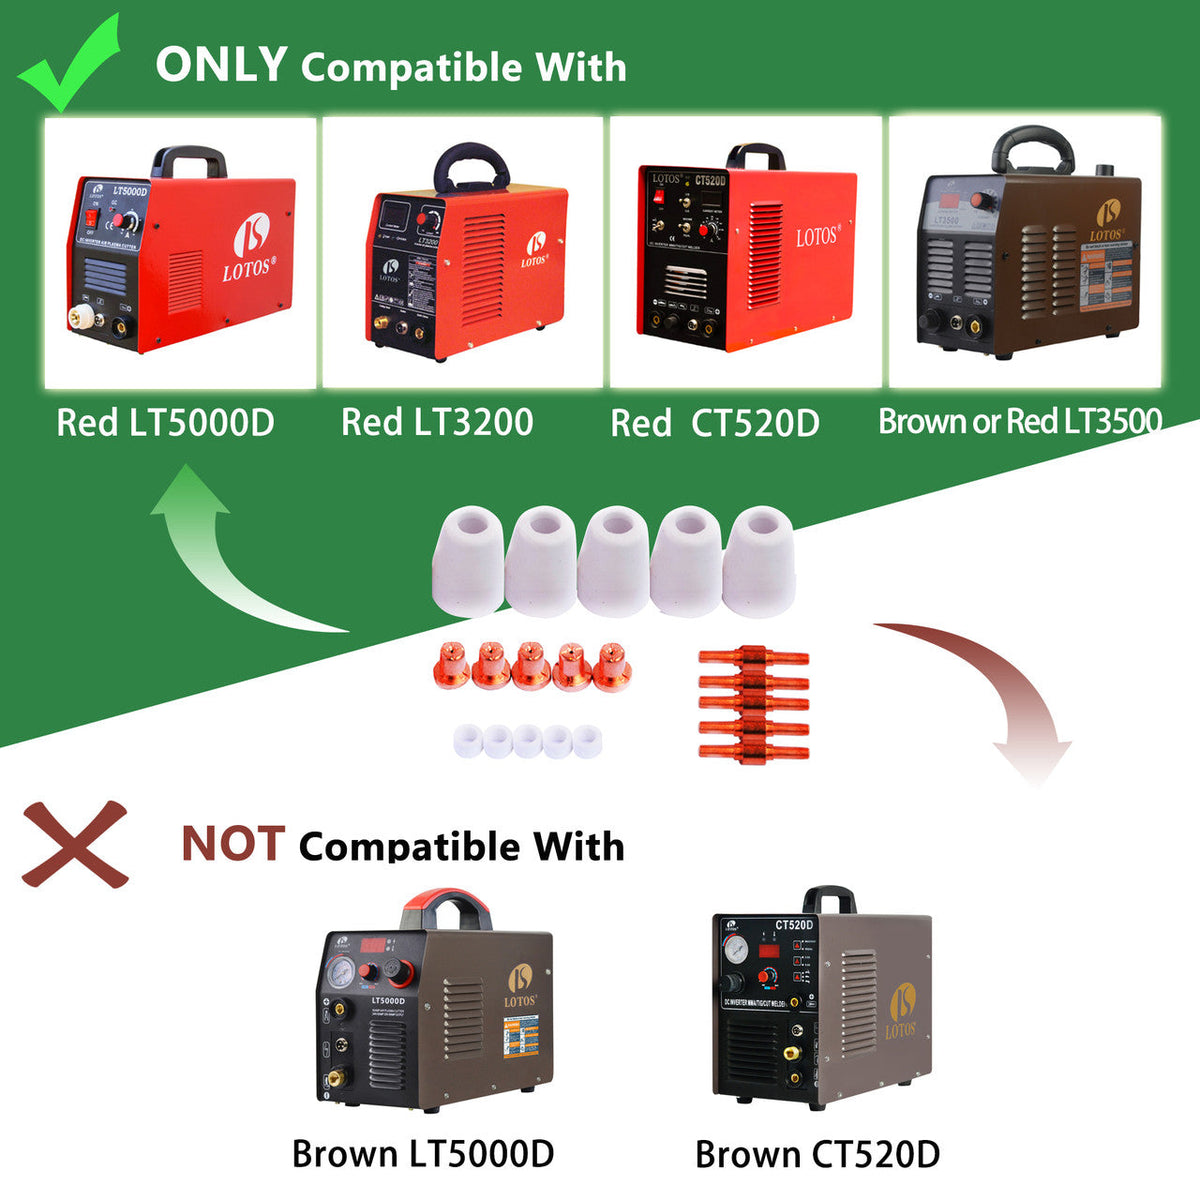 LOTOS LCON90 90PC CONSUMABLES NOZZLE ELECTRODE CUP AND RING FOR RED COLOR LT5000D, RED COLOR CT520D, RED AND BROWN LT3500, BROWN LT4000 - LOTOS Plasma Cutters & Welders